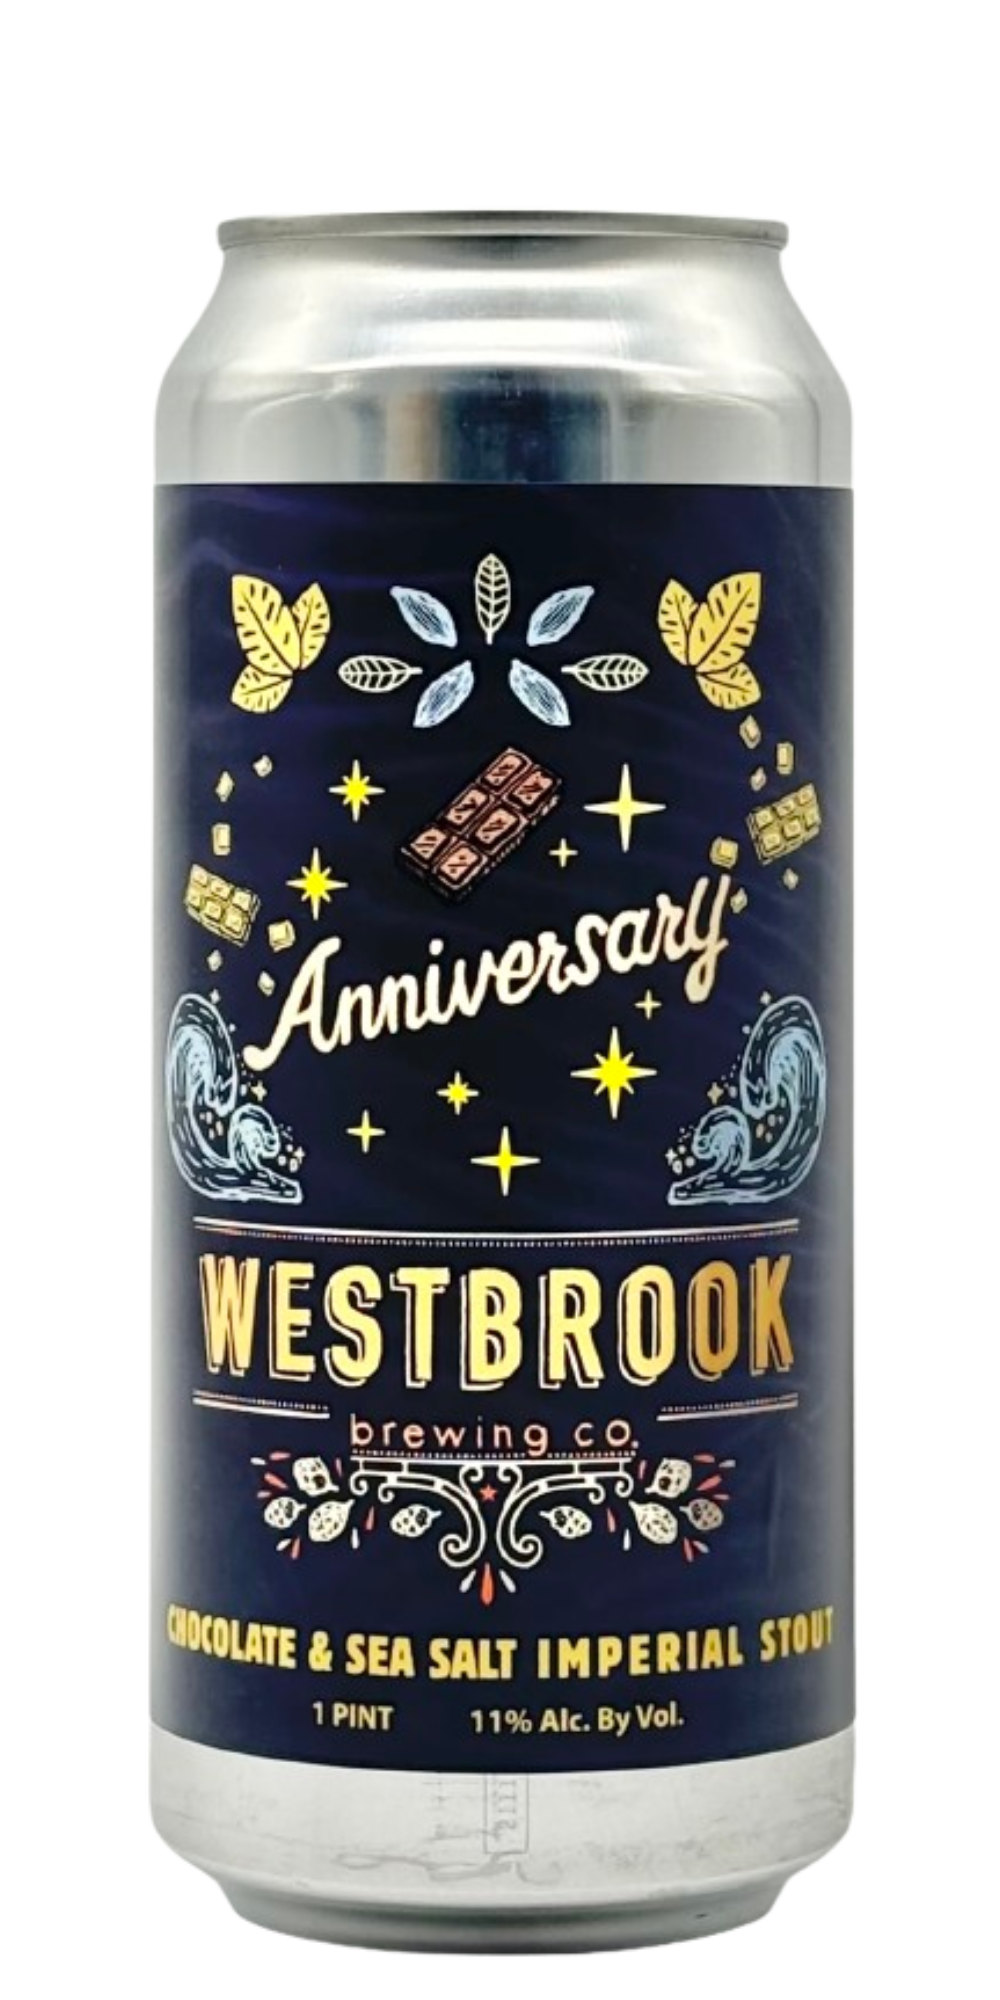 Westbrook -  13th Anniversary Chocolate & Sea Salt Imperial Stout